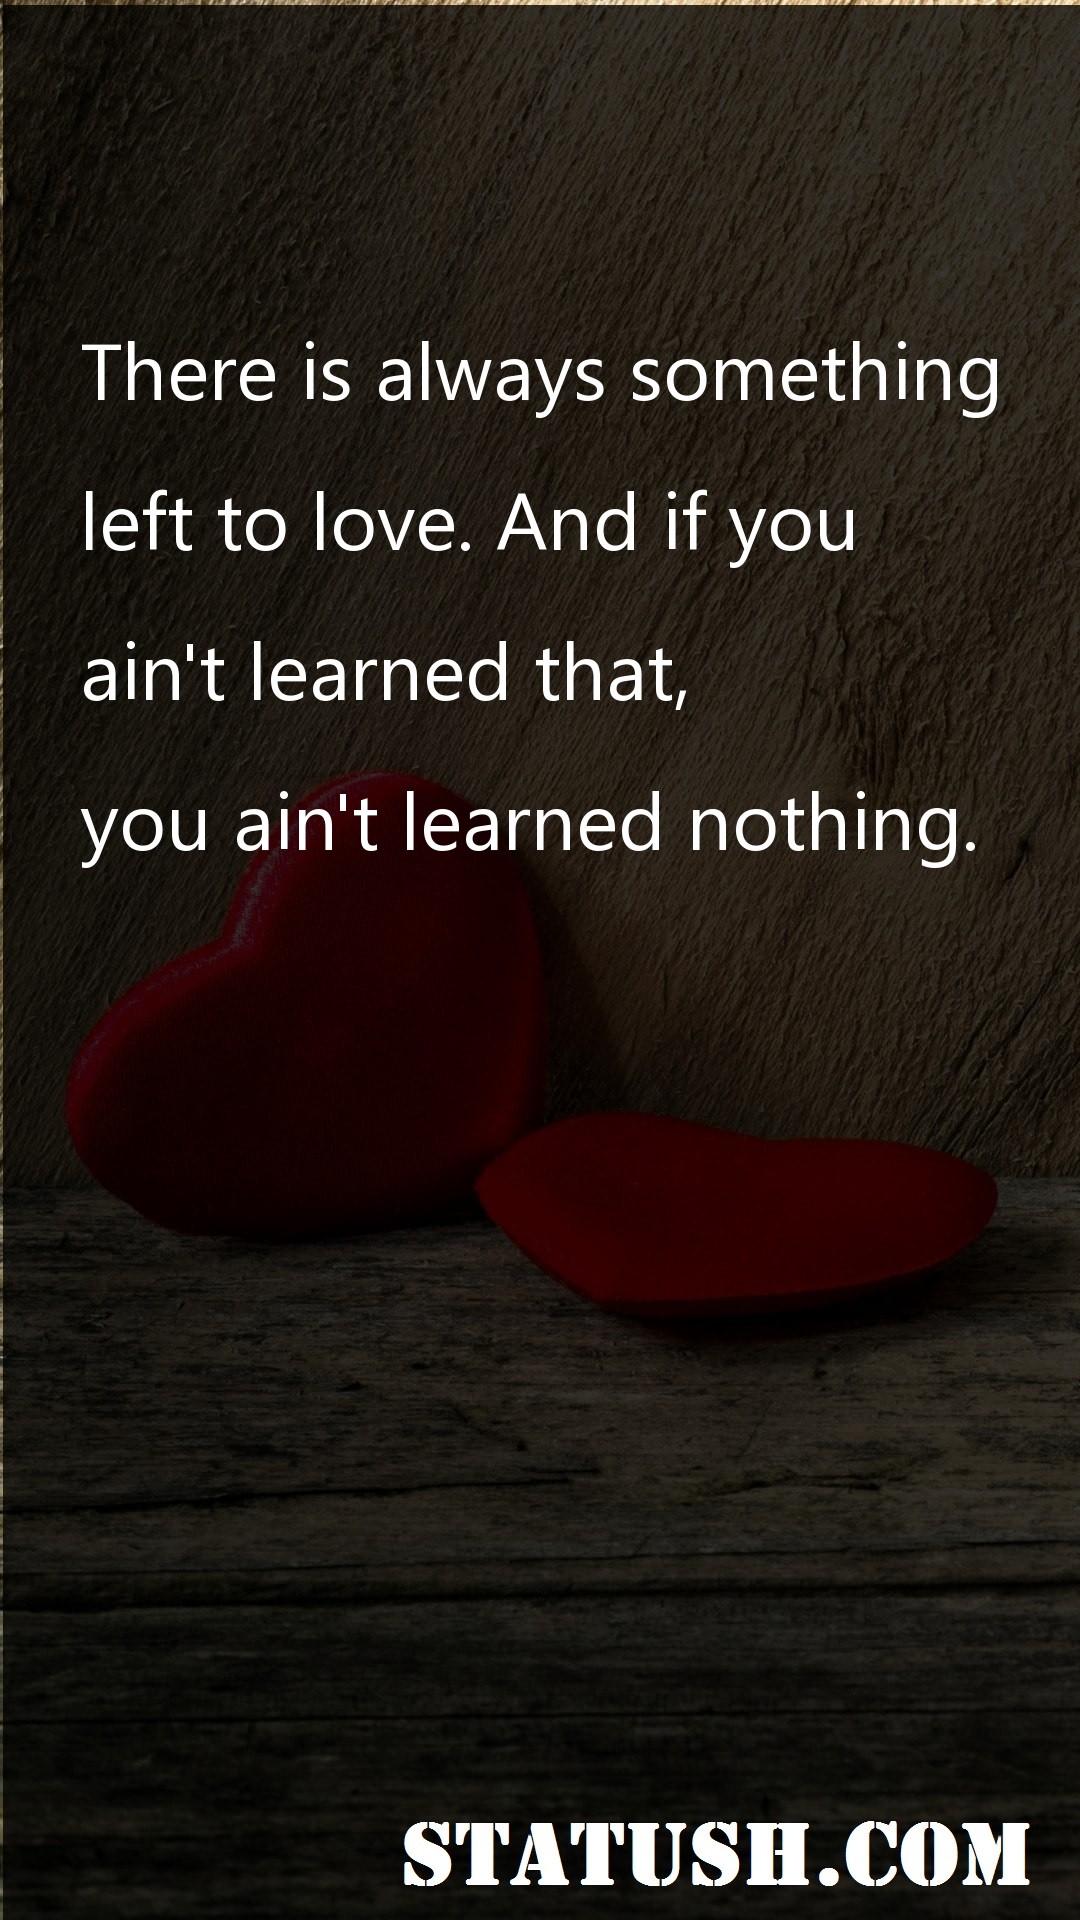 There is always something - Love Quotes at statush.com